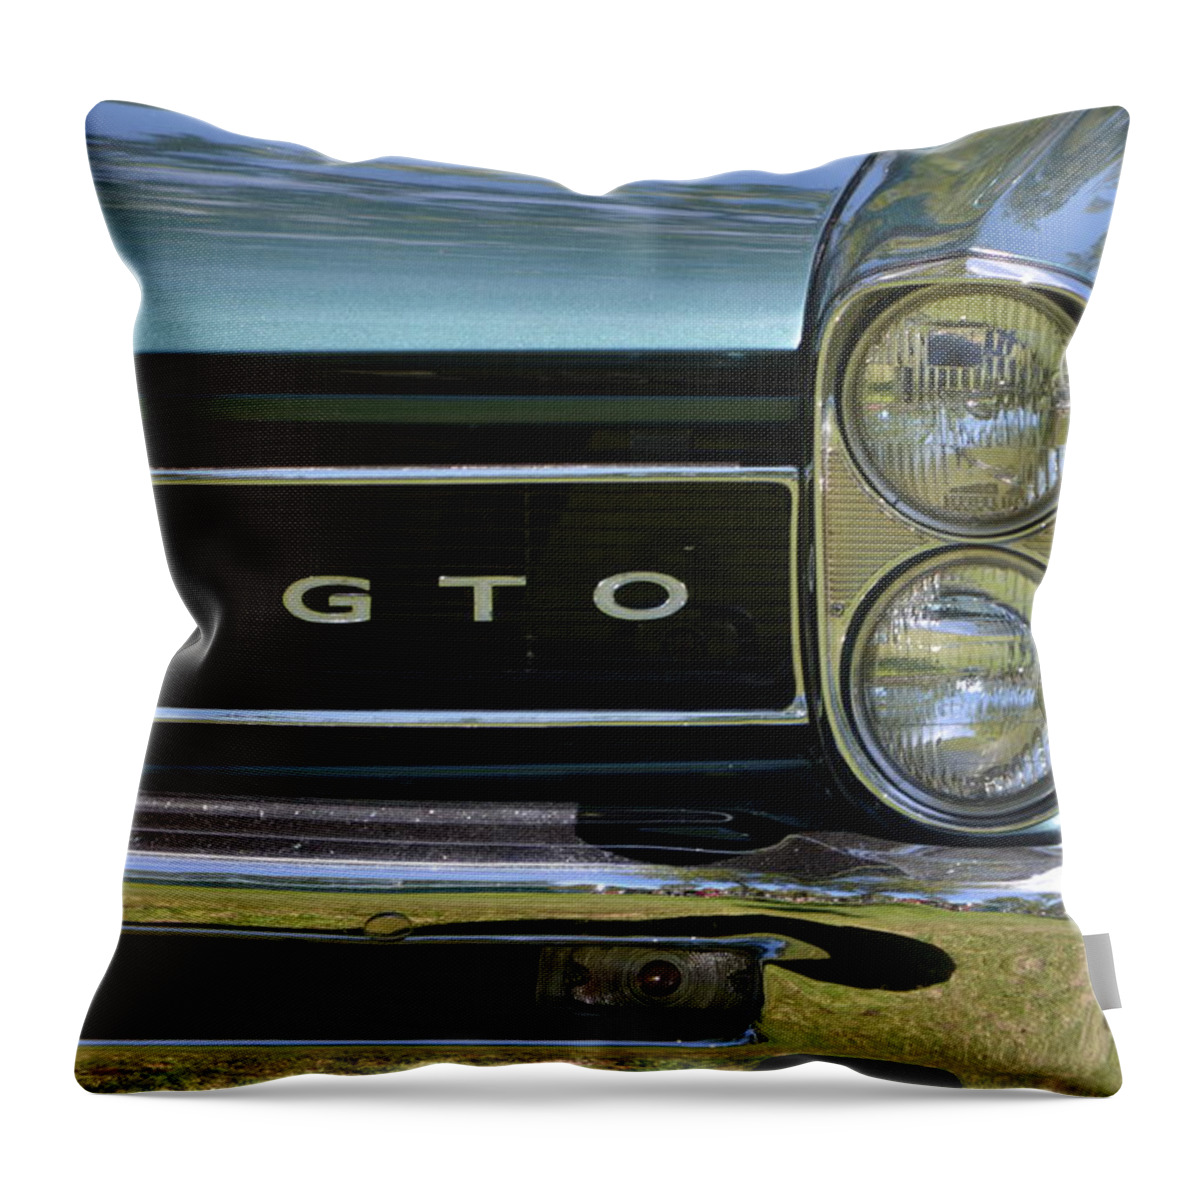 Gto Throw Pillow featuring the photograph Goat by Dean Ferreira